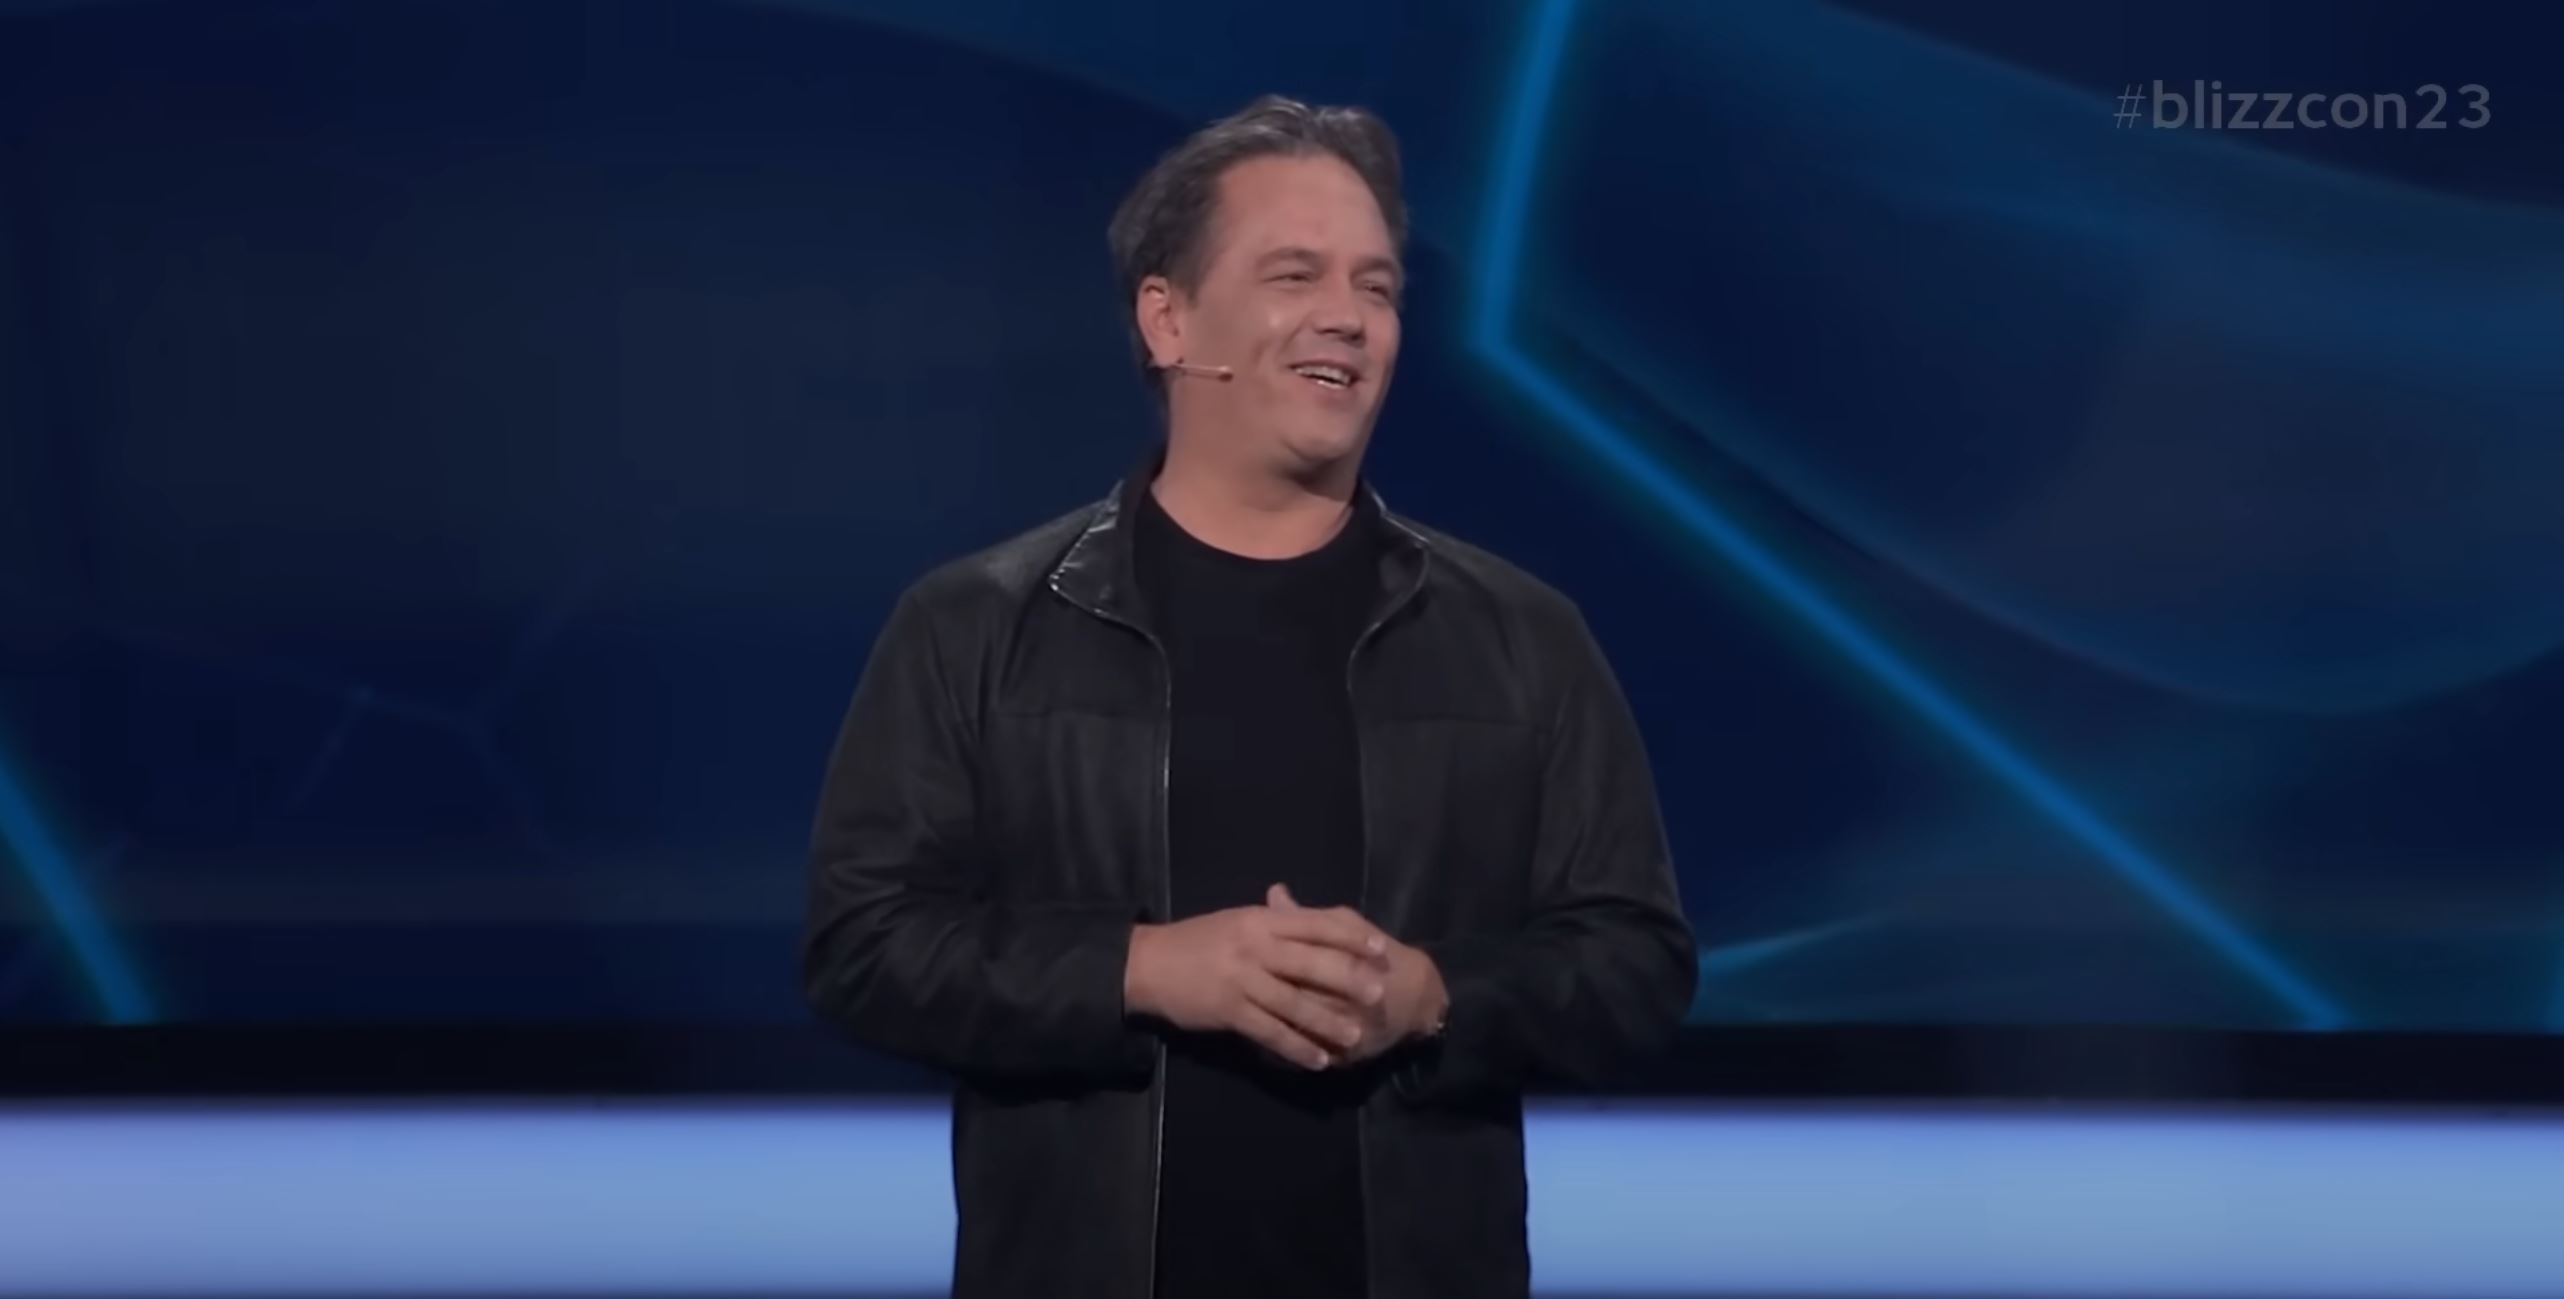 Xbox CEO Phil Spencer Reveals His Message For Gamers After Winning